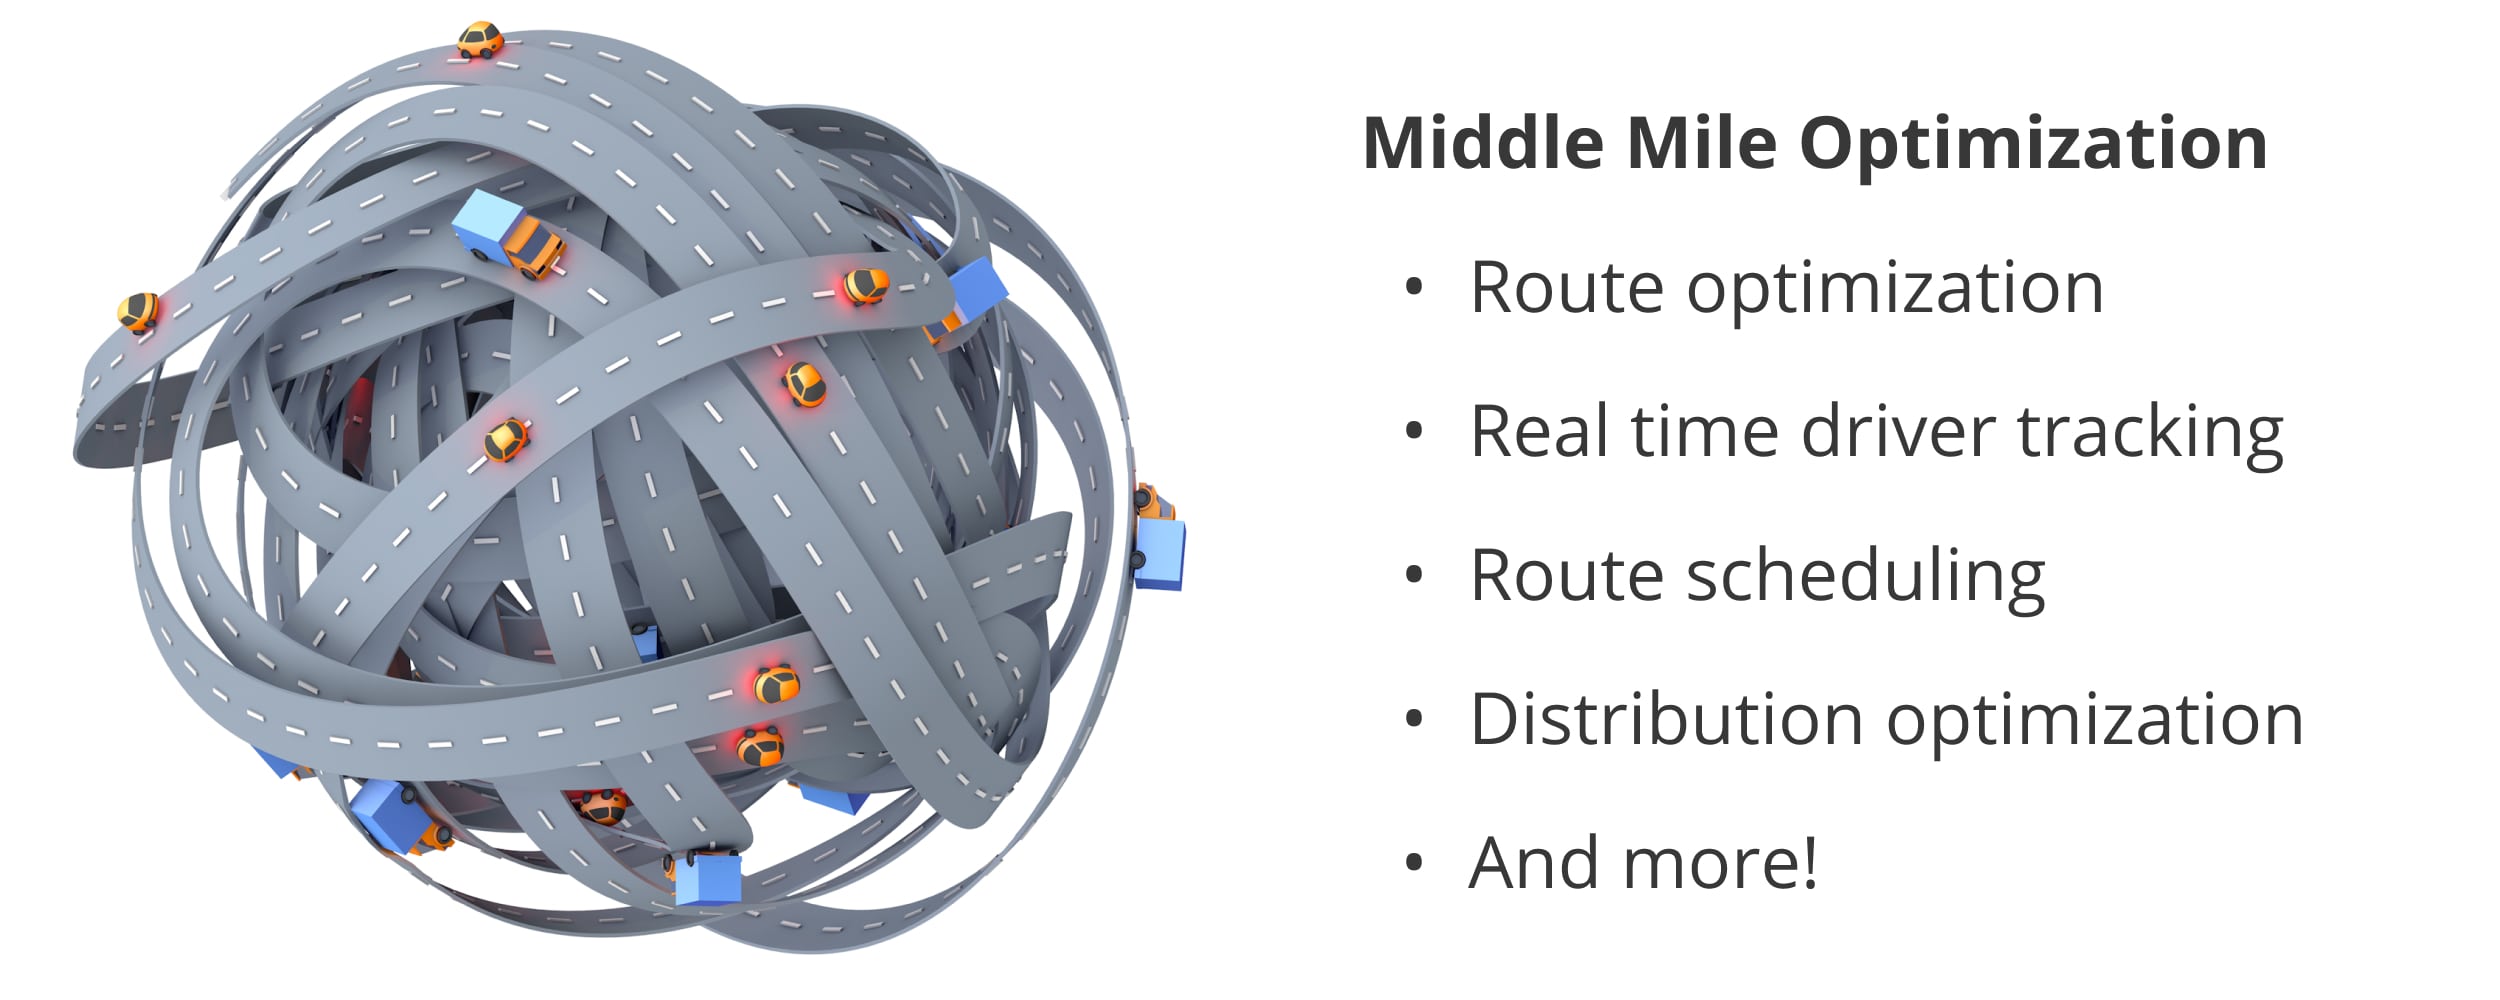 How to optimize middle mile delivery operations.